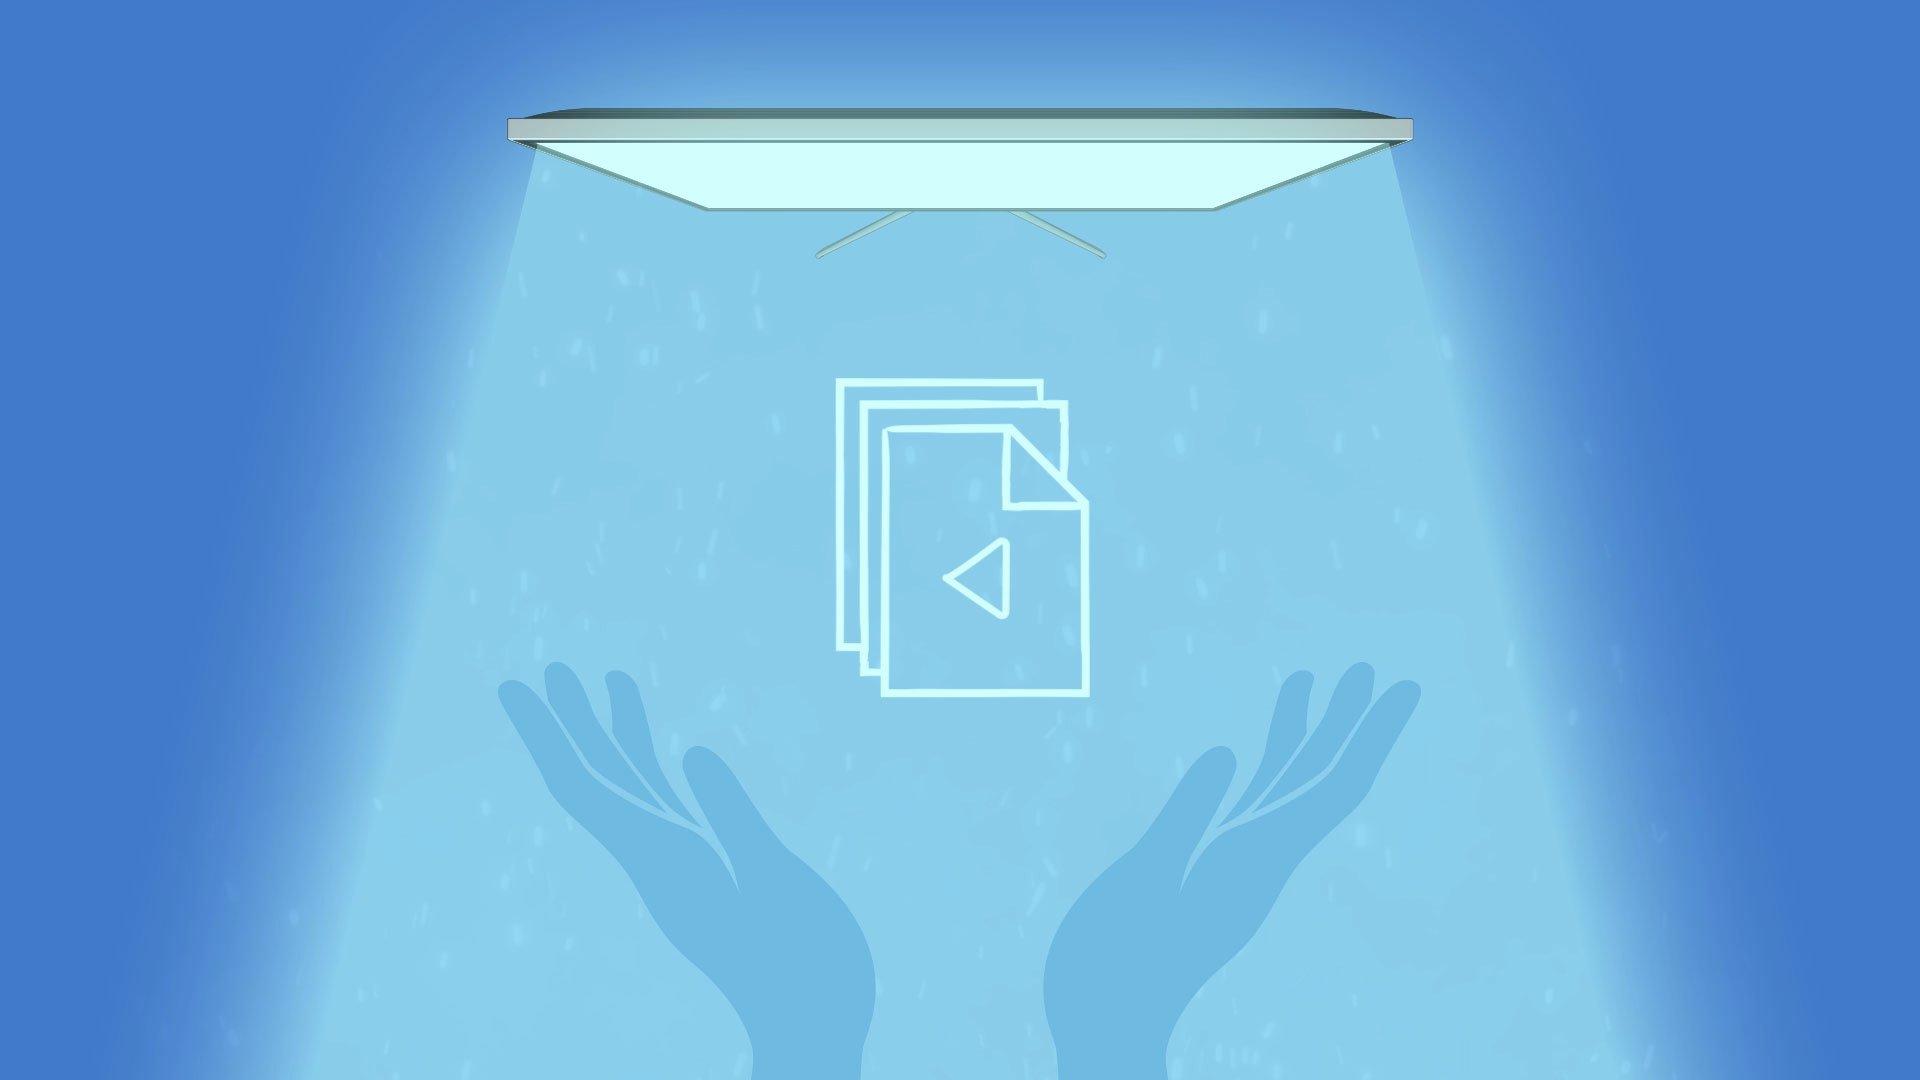 Image of a blue graphic with hands raised up to a spotlight shining on a TV screen